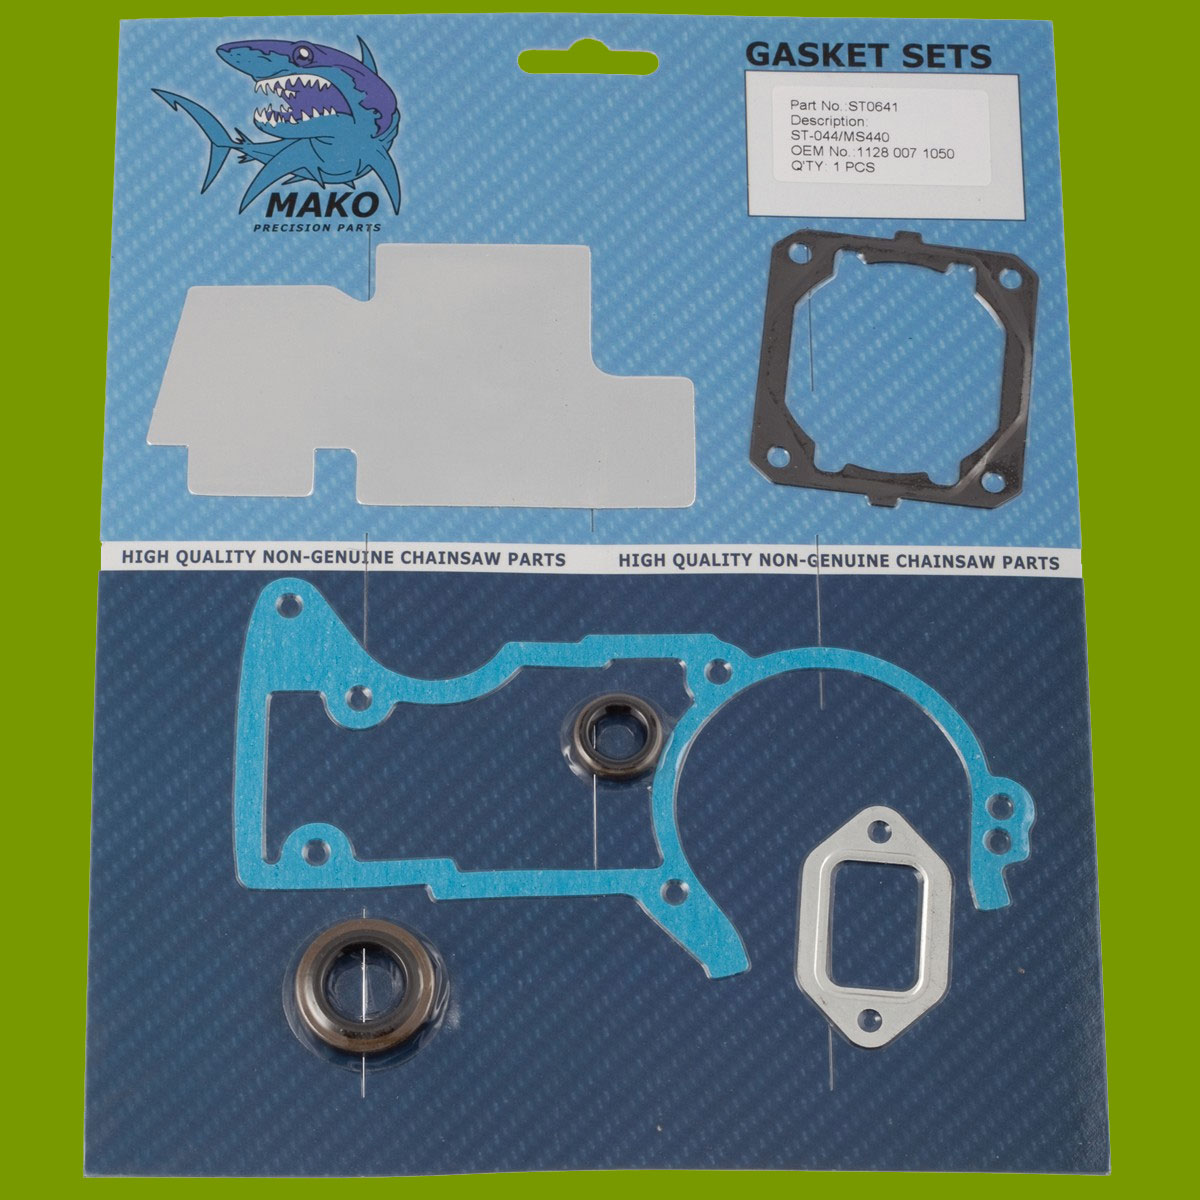 (image for) Stihl Gasket Set for 044 and MS440 1128 007 1050, ST0641